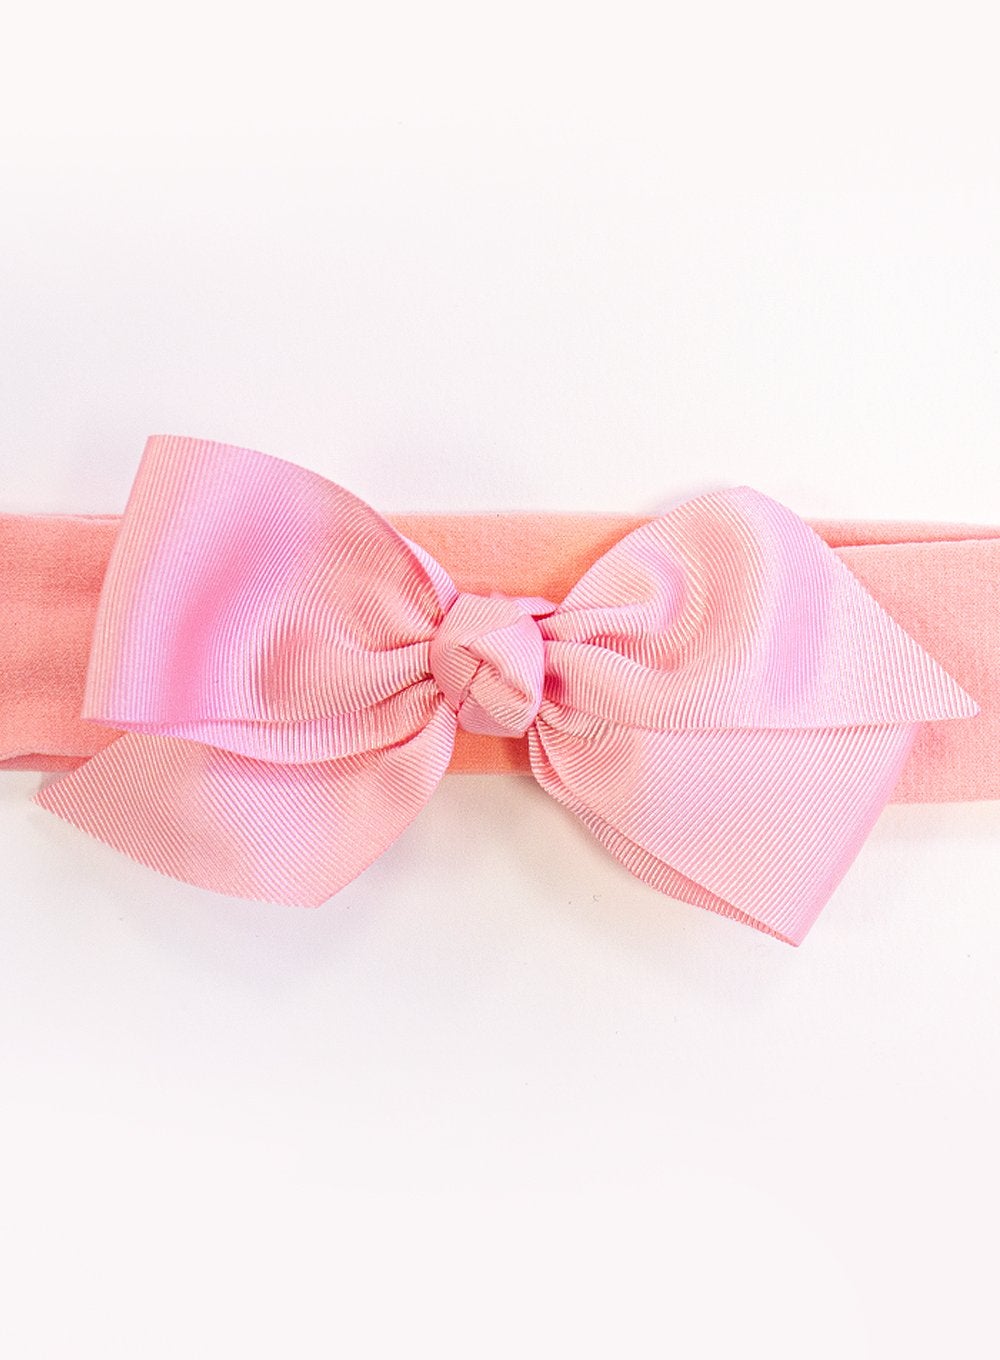 Lily Rose Alice Bands Bow Headband in Pink - Trotters Childrenswear